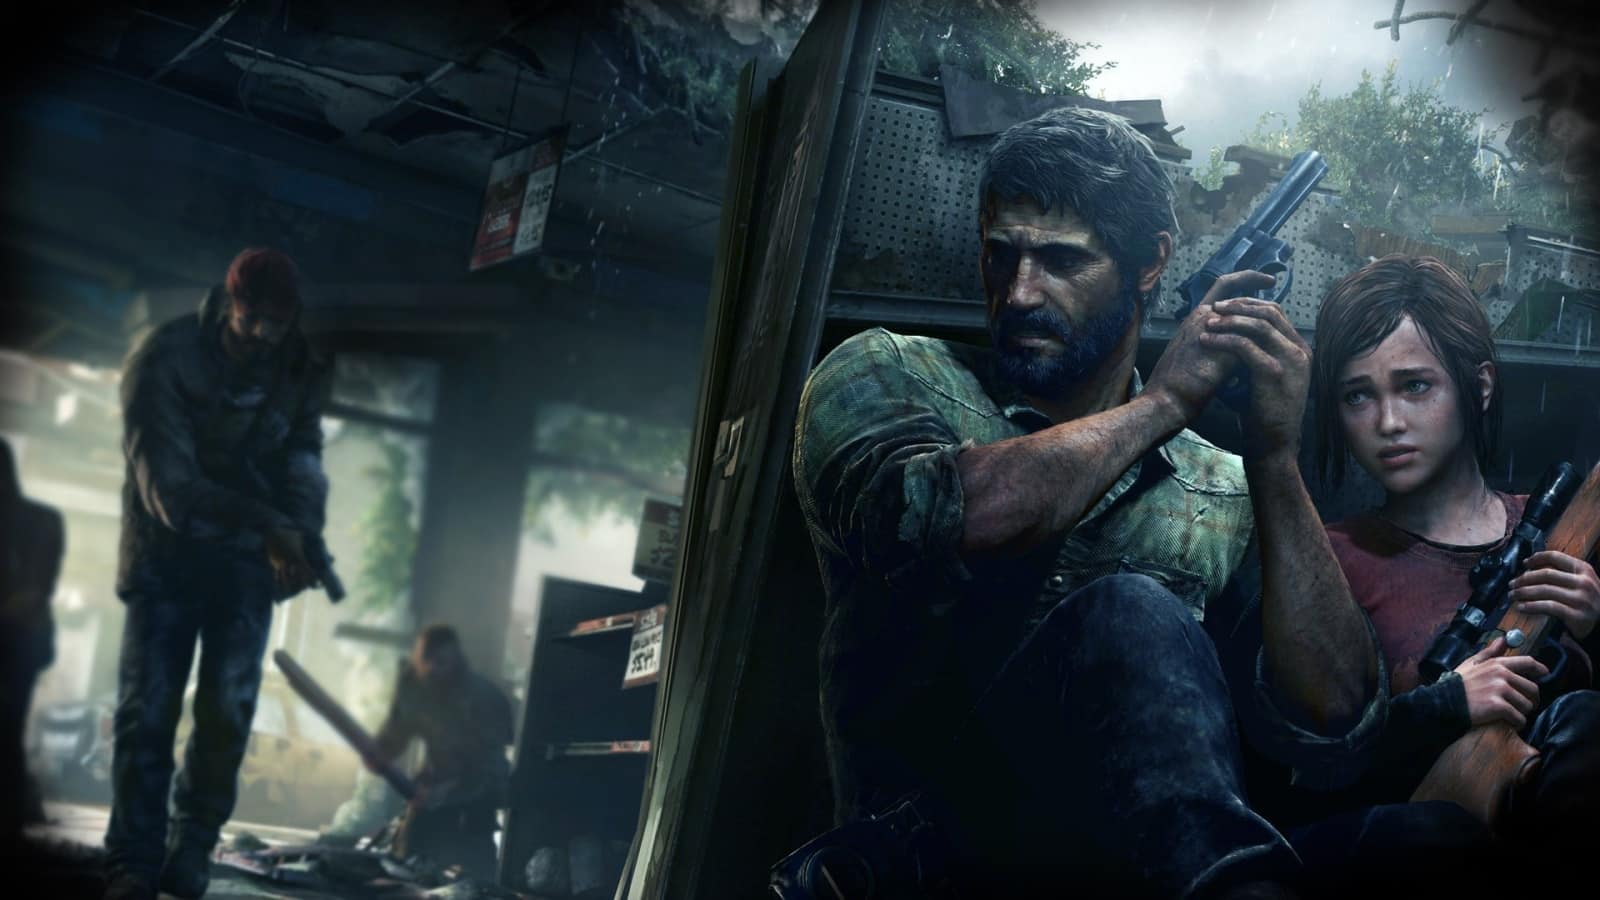 The Last Of Us Remake' Release Date Leaked By Reliable Insider